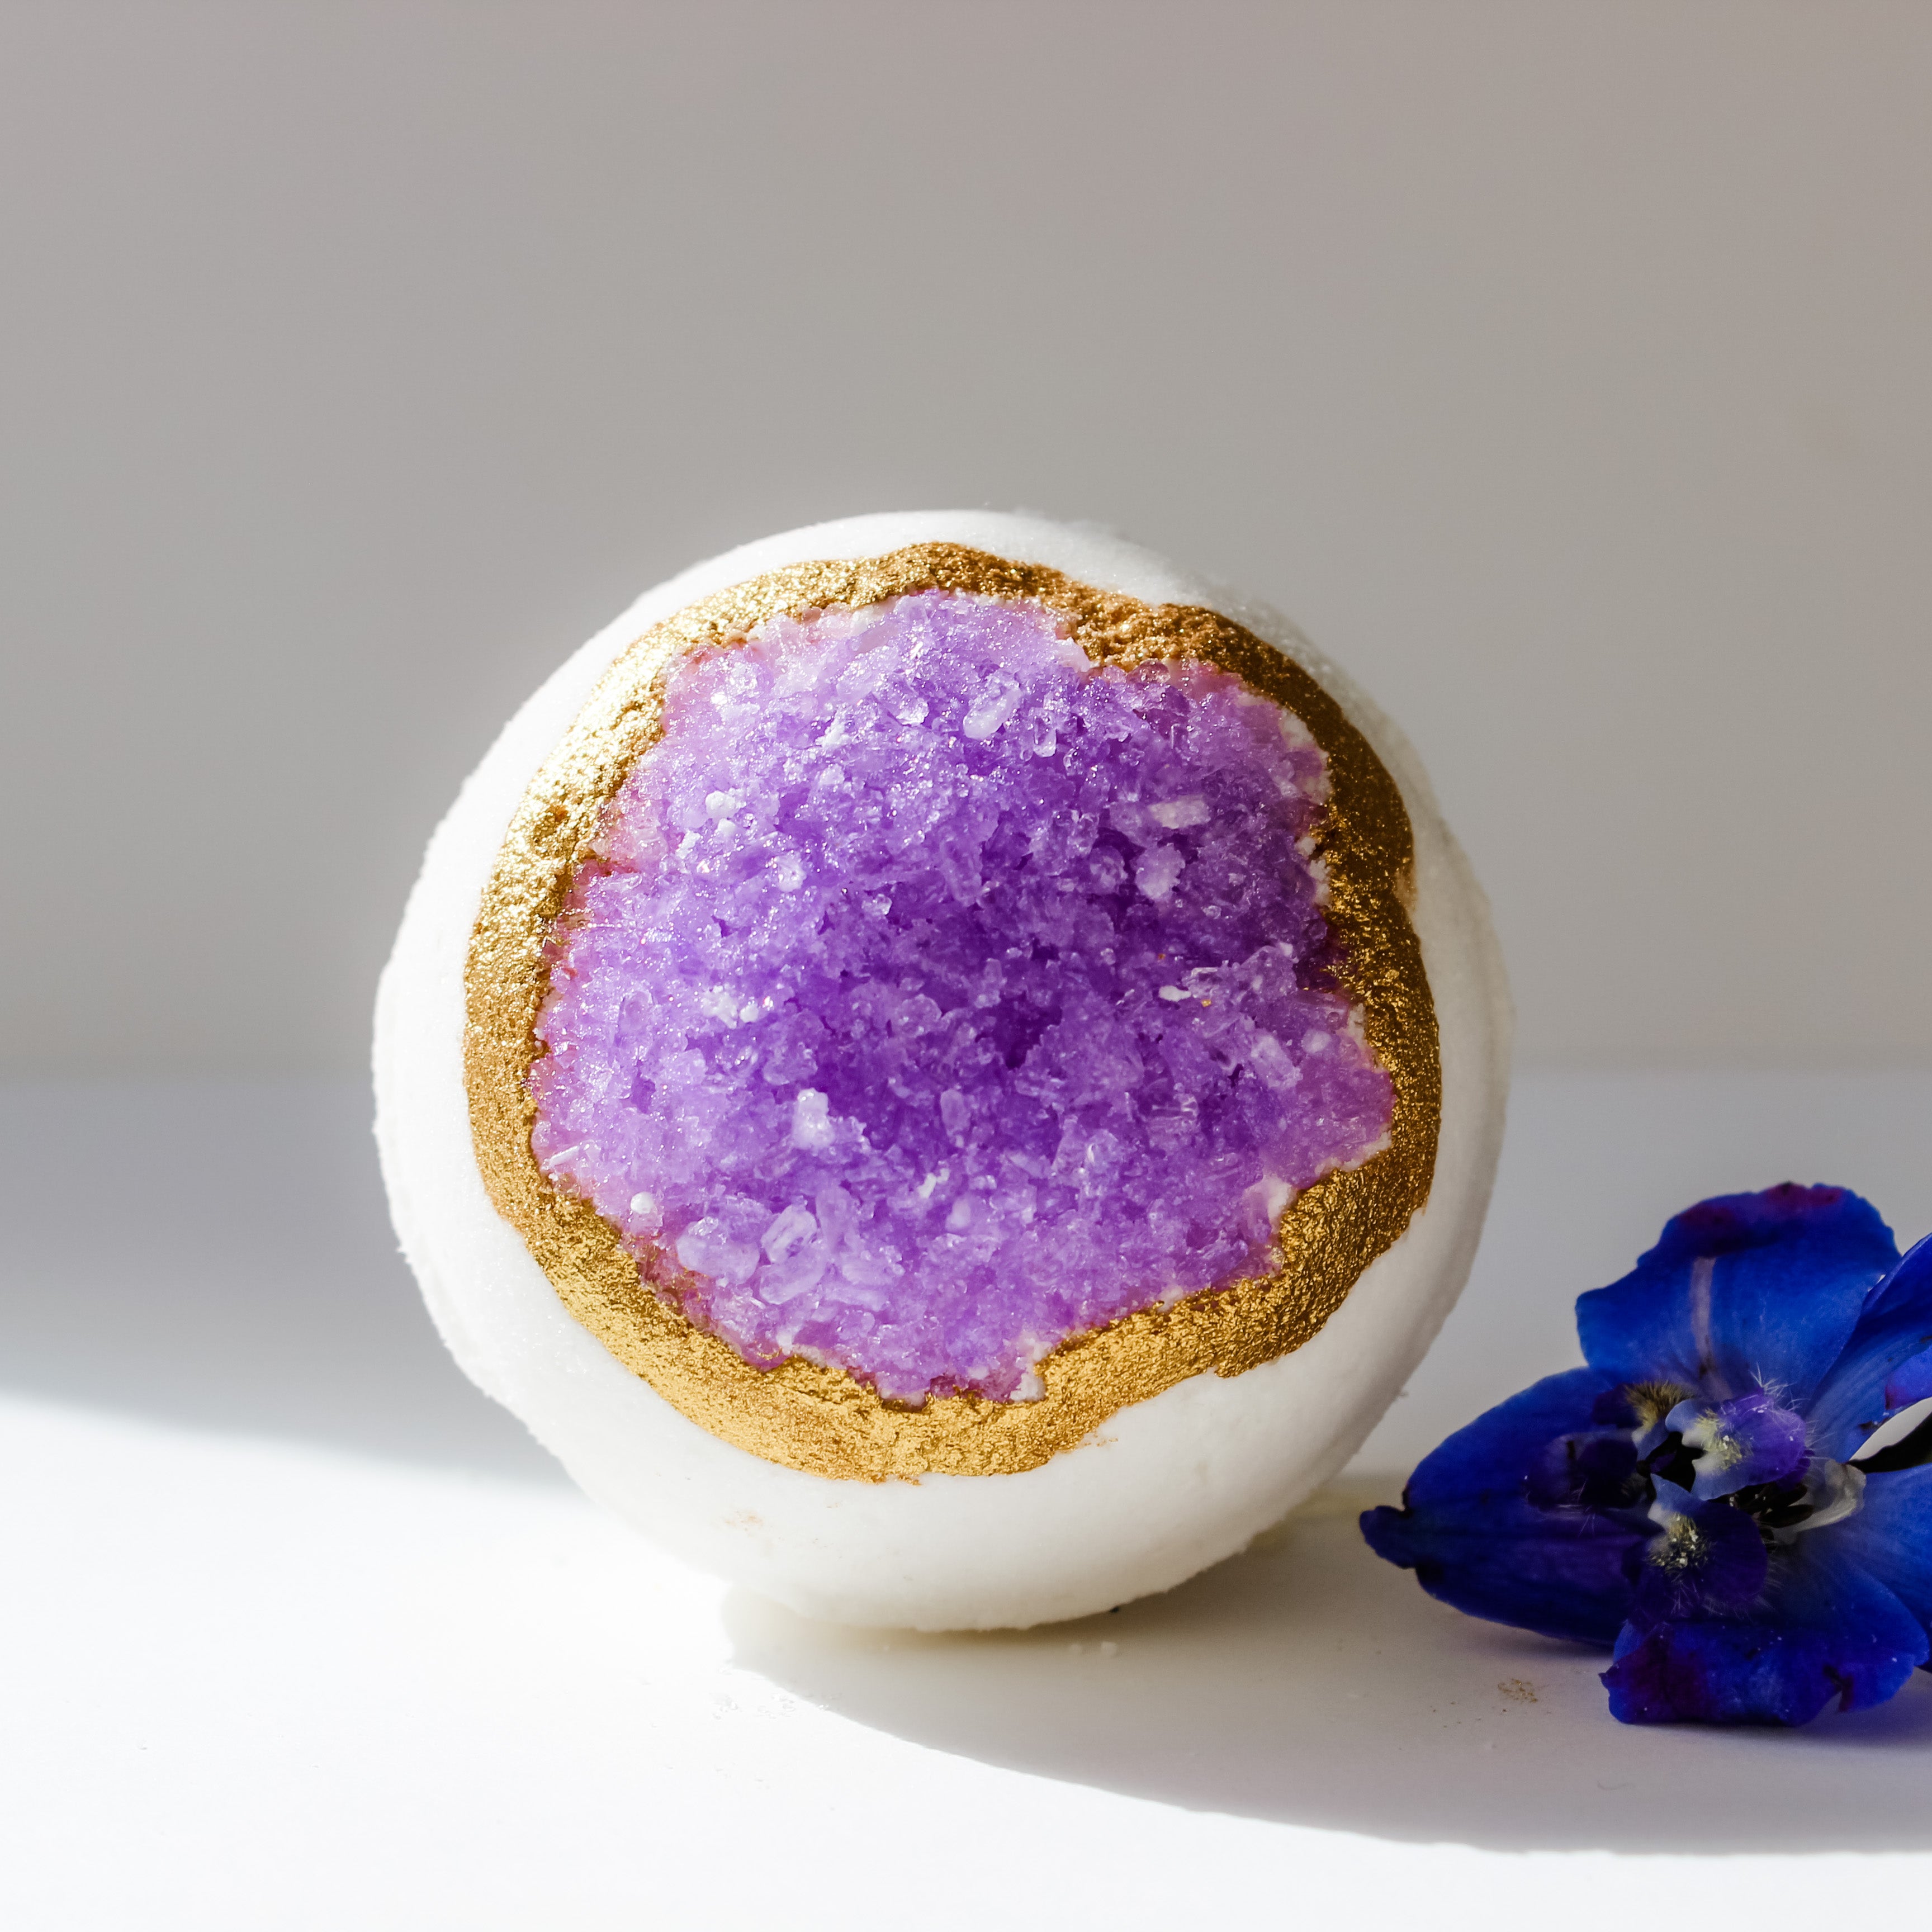 Amethyst Geode Bath Crystal Bomb - Handmade with Natural Ingredients. Hidden Forest Naturals